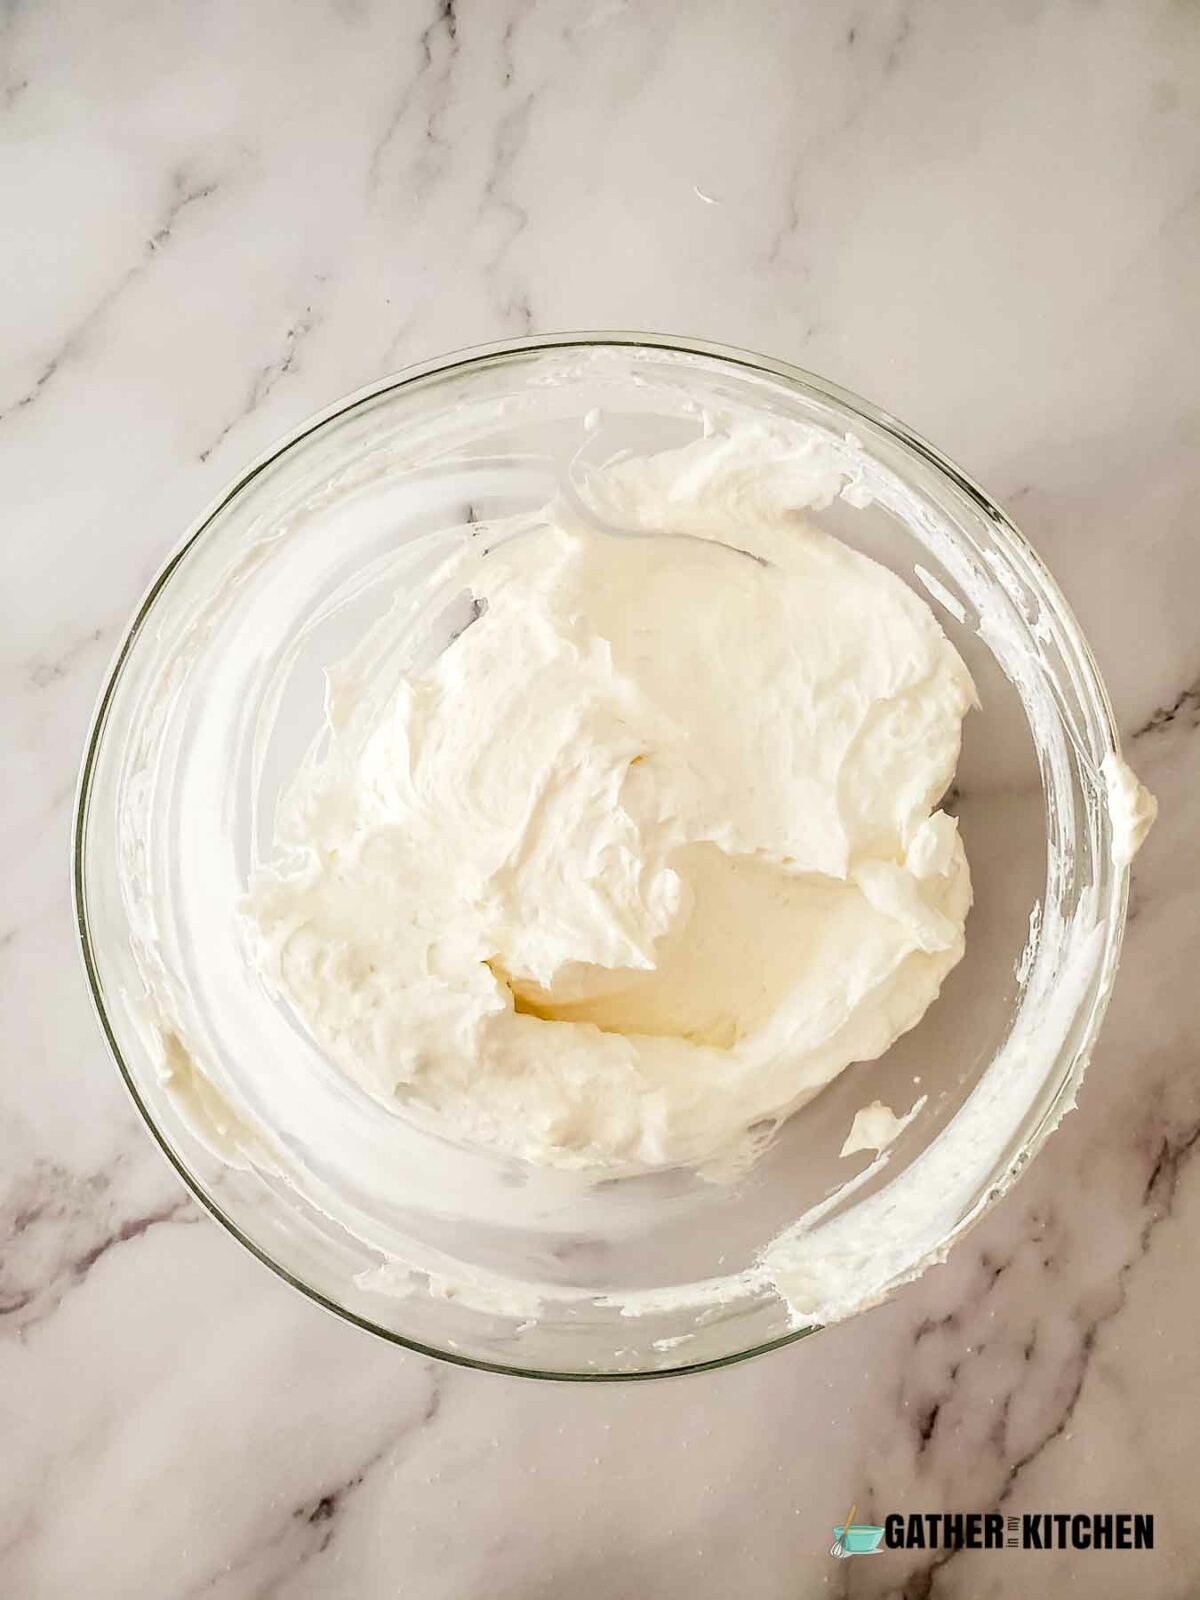 Whipped topping stirred into cream cheese mixture.